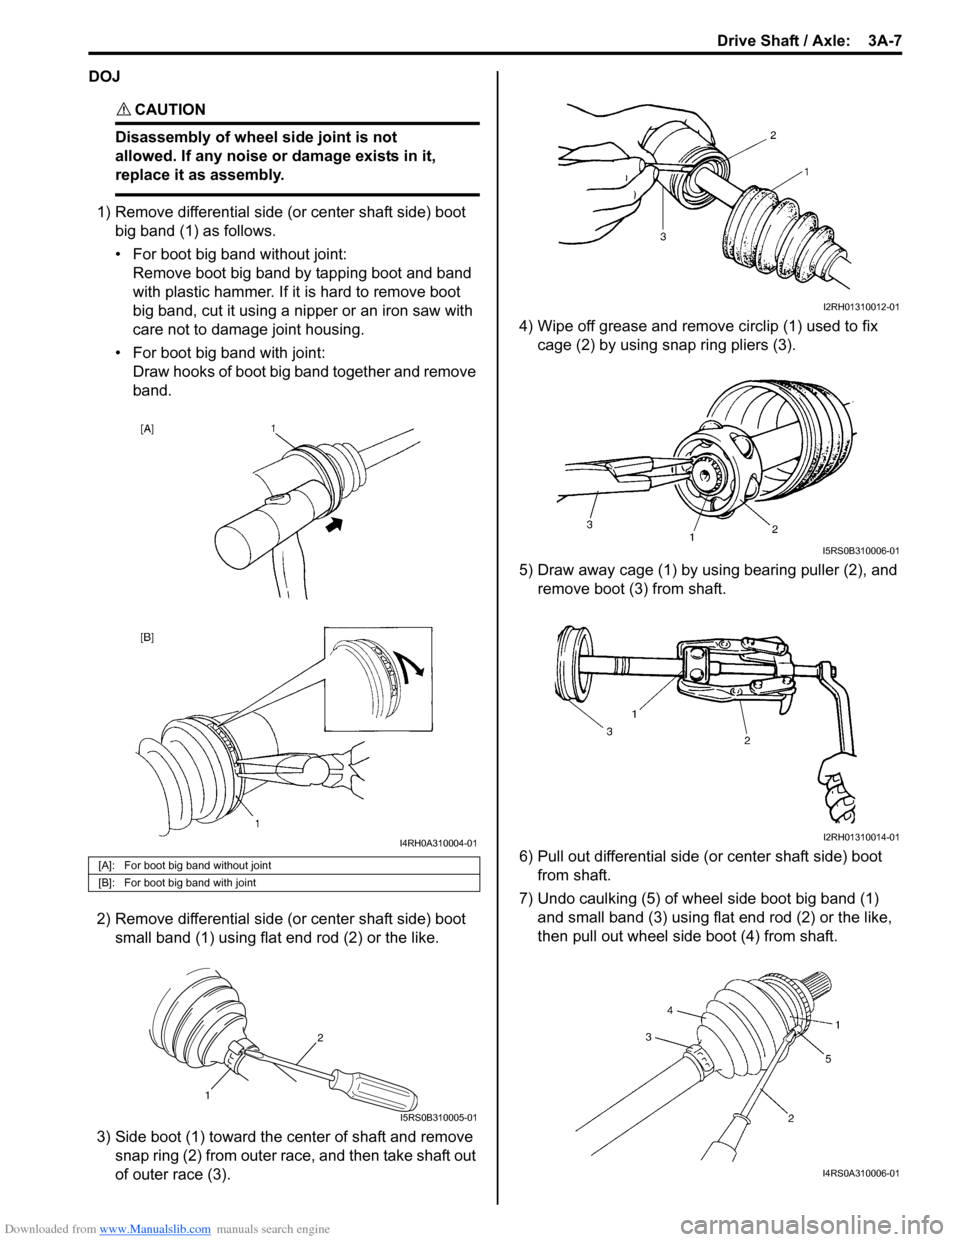 SUZUKI SWIFT 2006 2.G Service Workshop Manual Downloaded from www.Manualslib.com manuals search engine Drive Shaft / Axle:  3A-7
DOJ
CAUTION! 
Disassembly of wheel side joint is not 
allowed. If any noise or damage exists in it, 
replace it as as